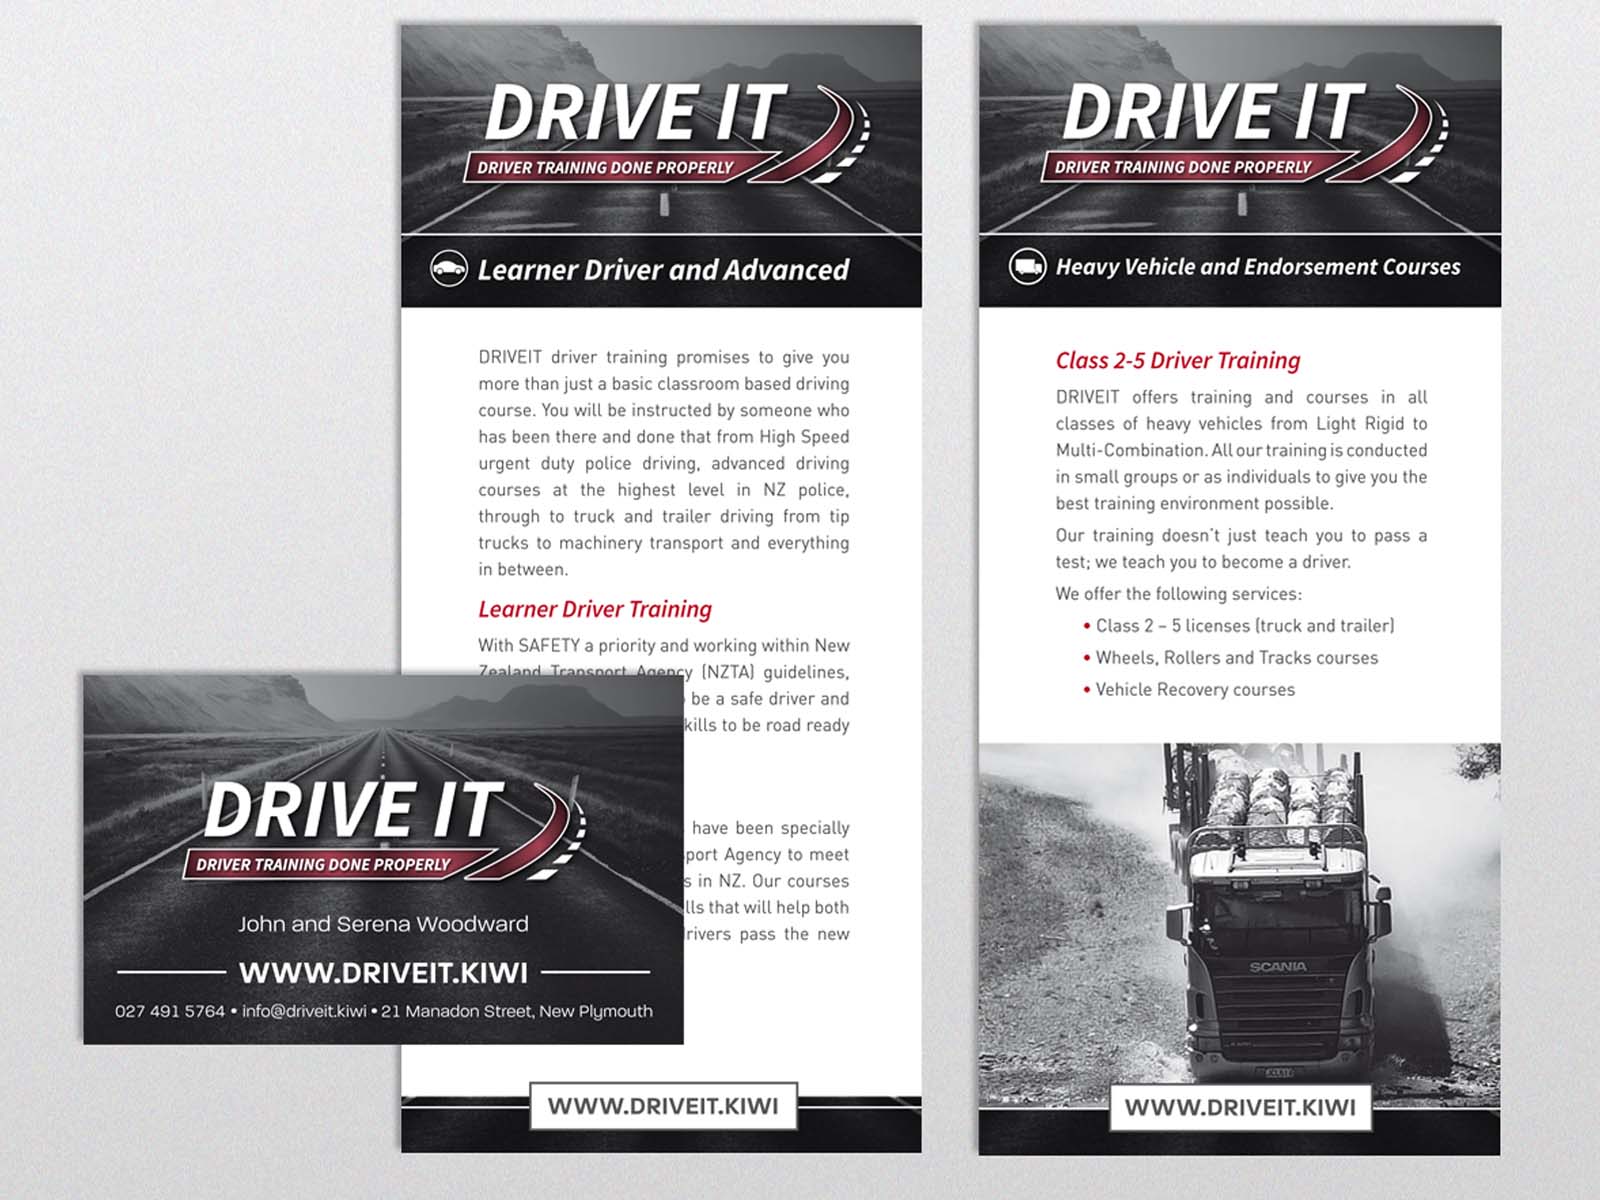 Drive It flyers and business card.